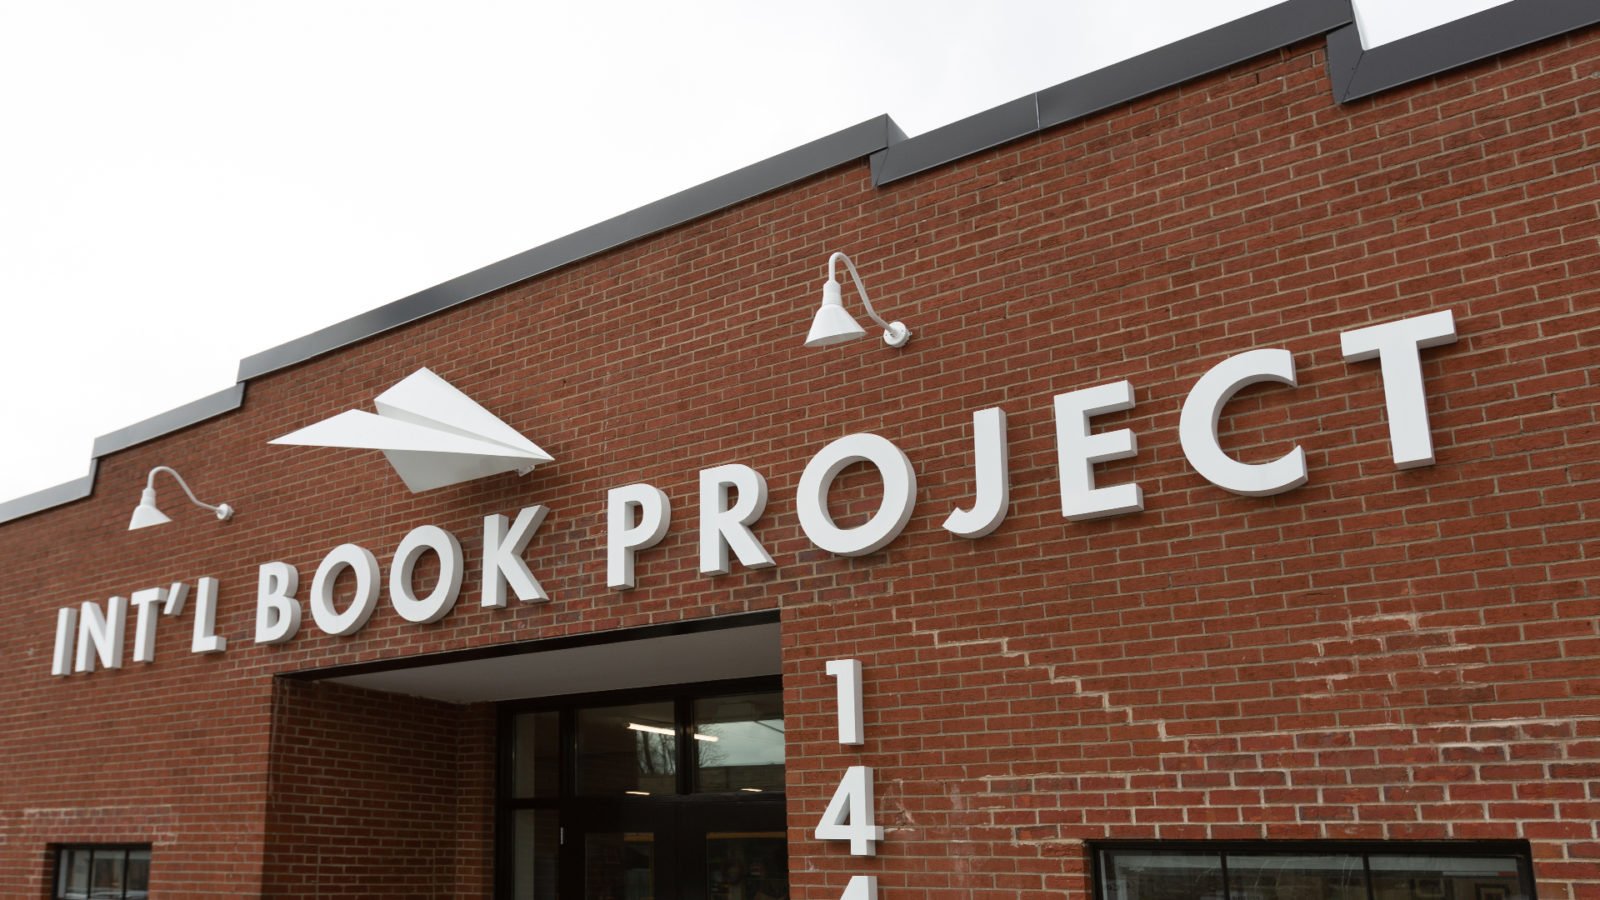 Checking in on International Book Project